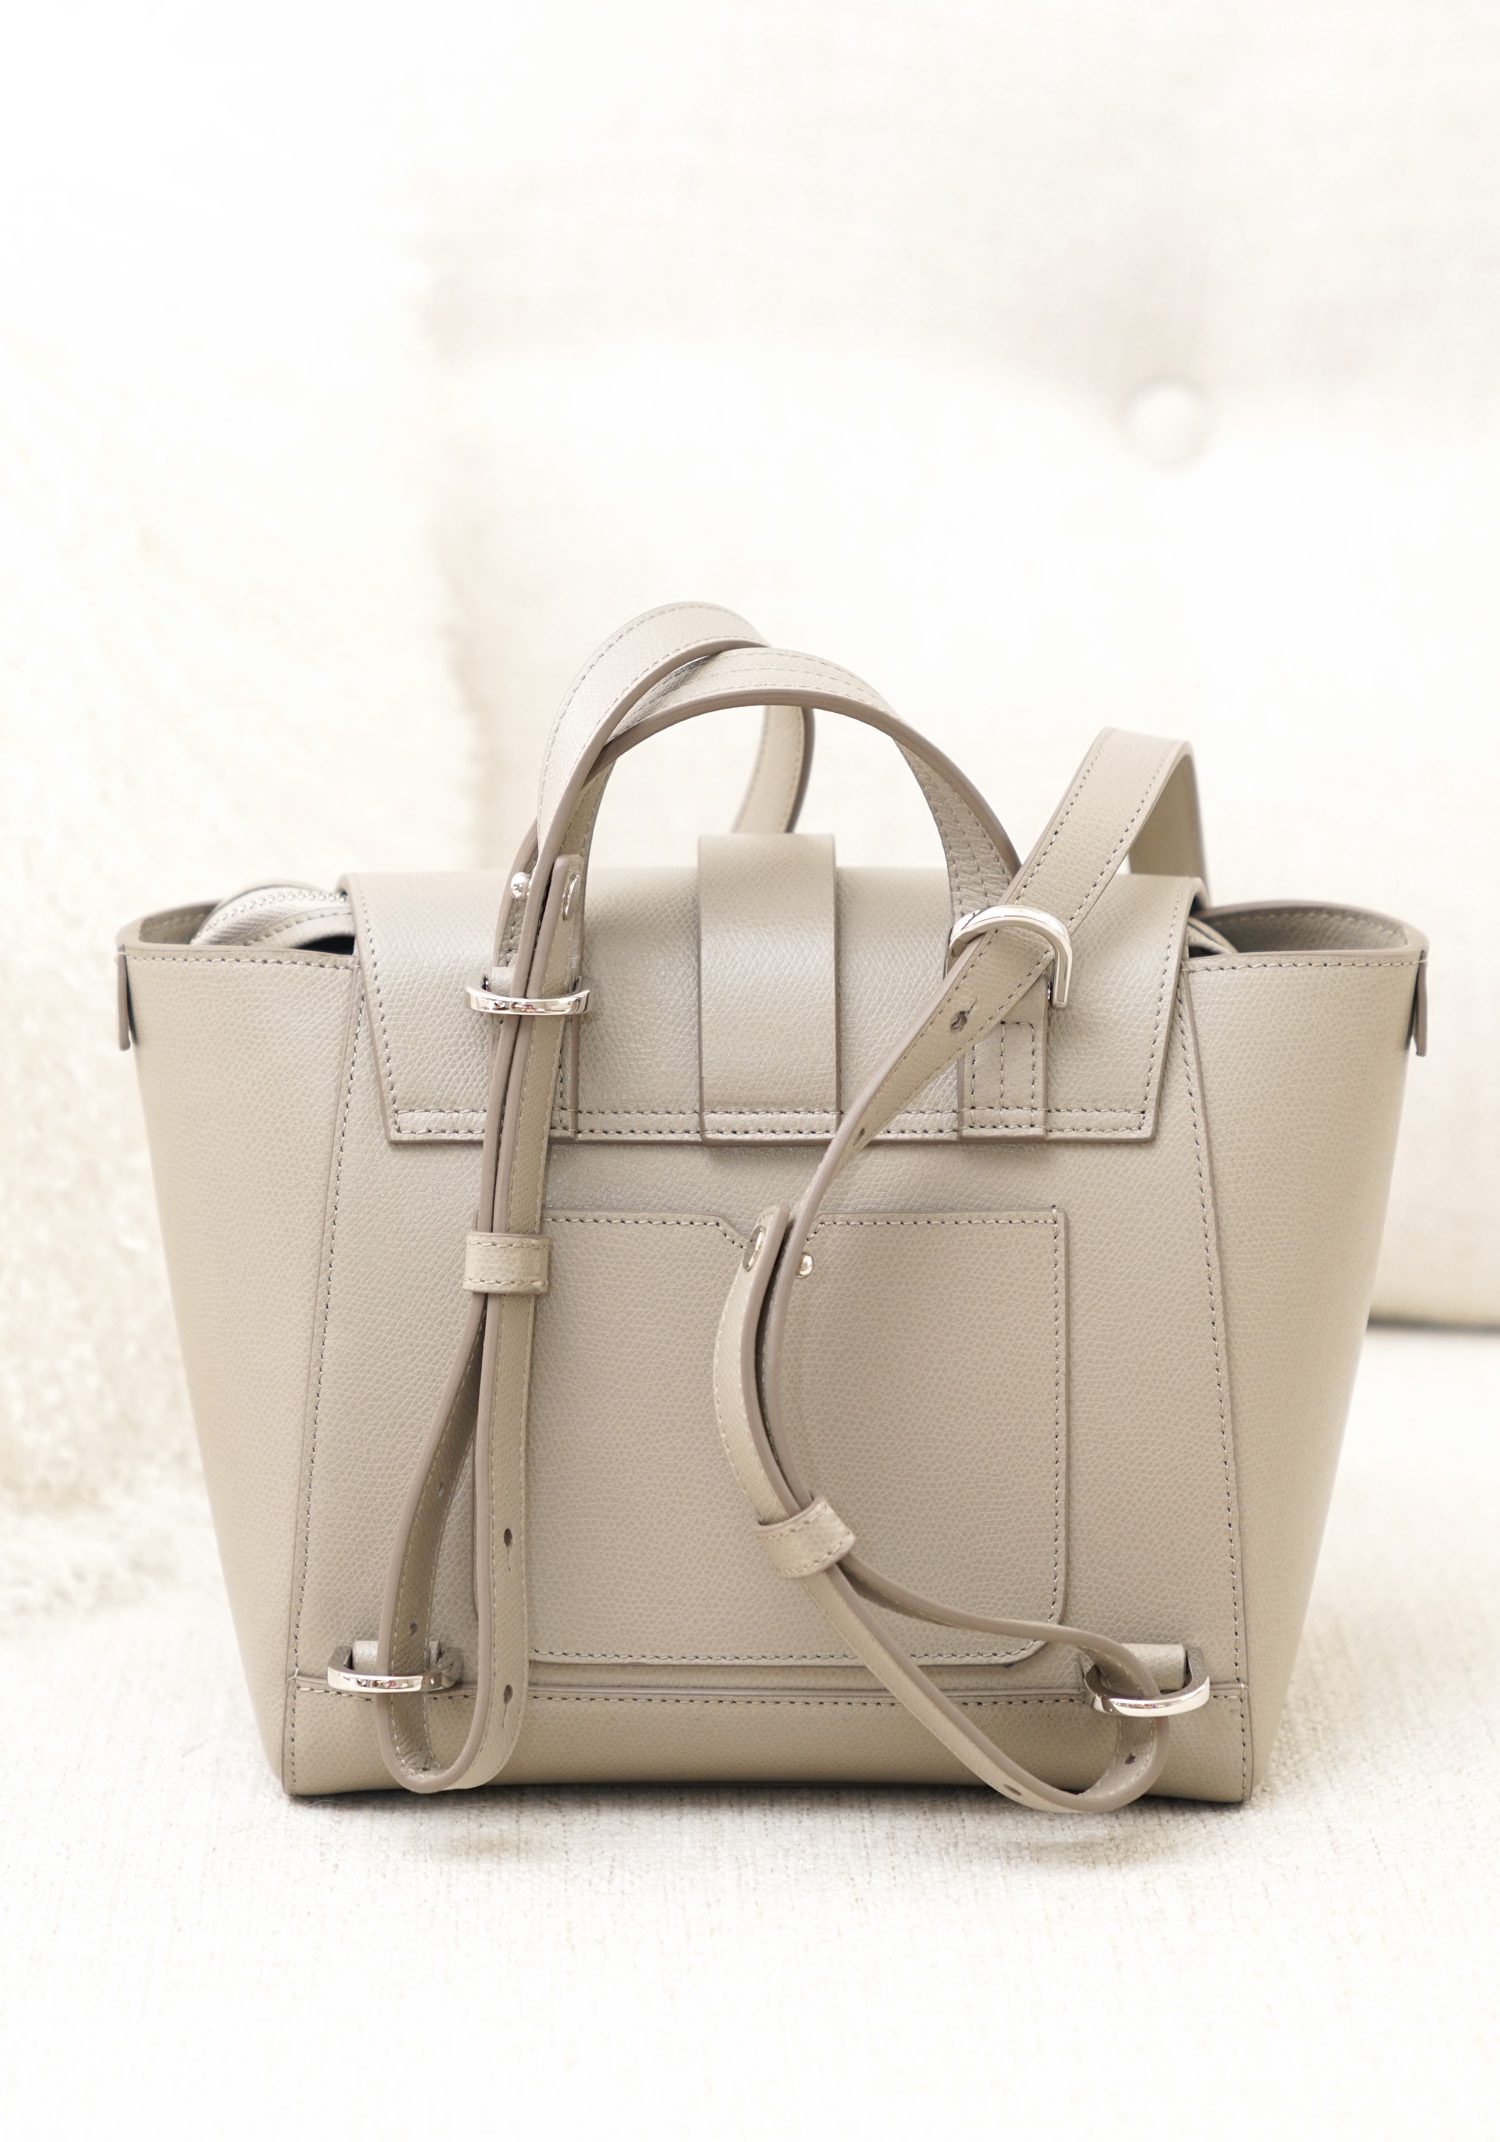 senreve maestra bag Grey. Size Mini. Excellent Condition. Used Only Few  Times